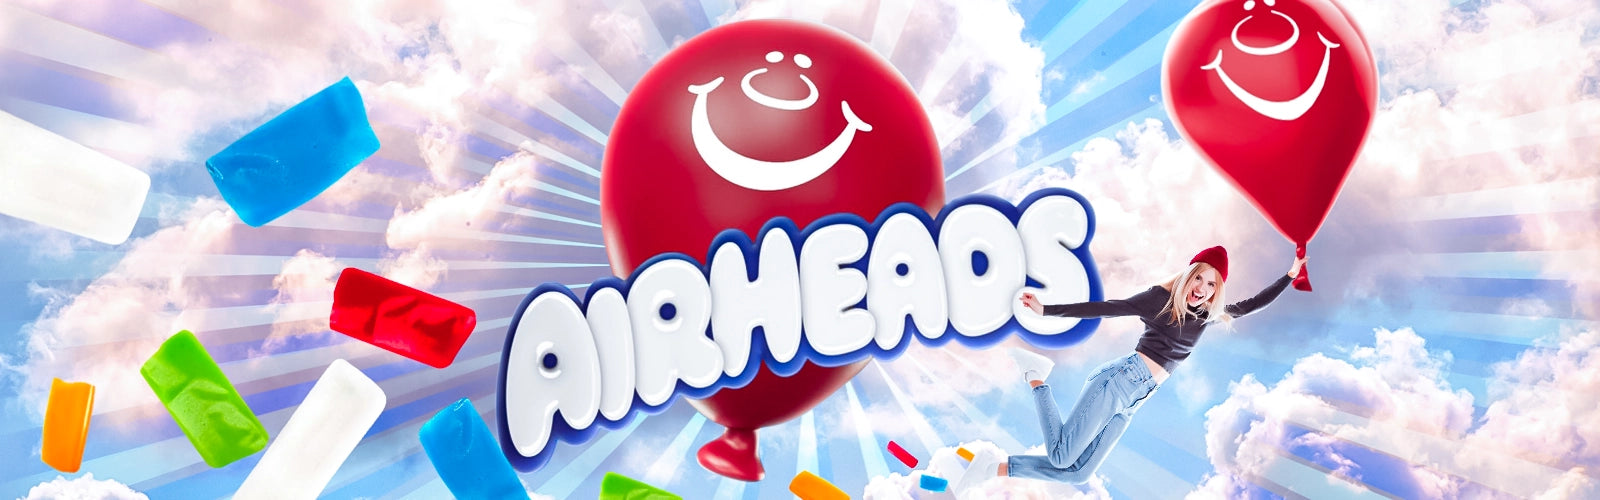 Airheads collection banner